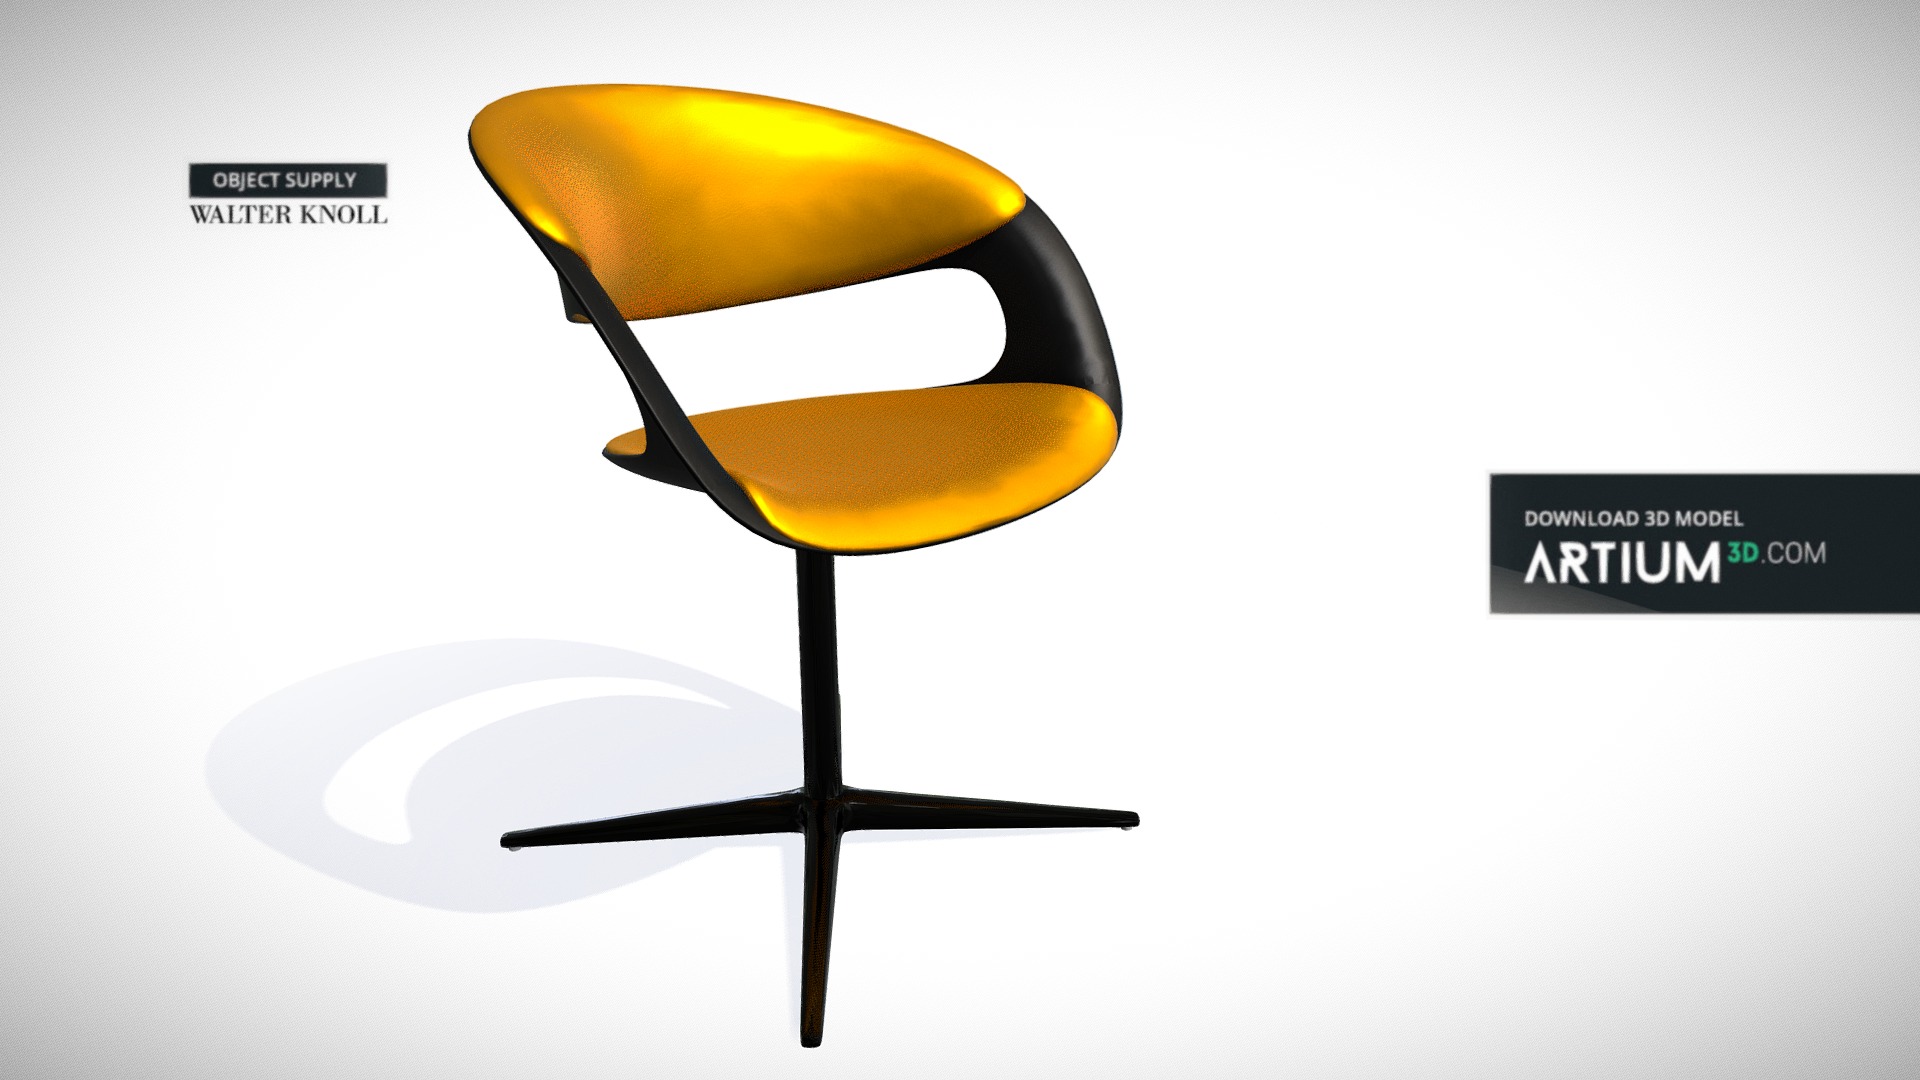 3D model Chair Lox from Walter Knoll - This is a 3D model of the Chair Lox from Walter Knoll. The 3D model is about a yellow and black chair.